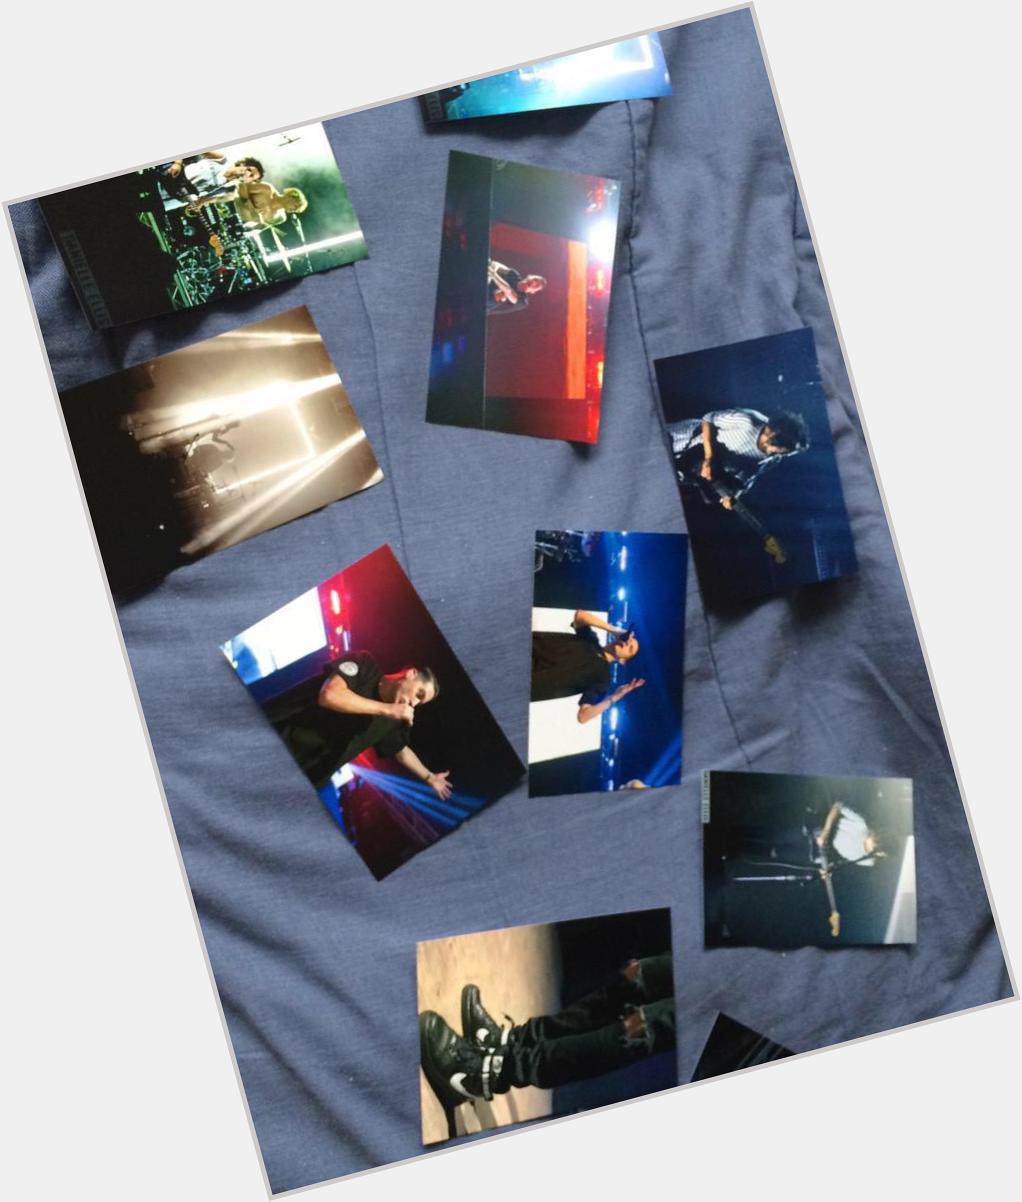   TeamG_Eazy: to wish G_Eazy a Happy Birthday AND for a chance to win one of these prints from 